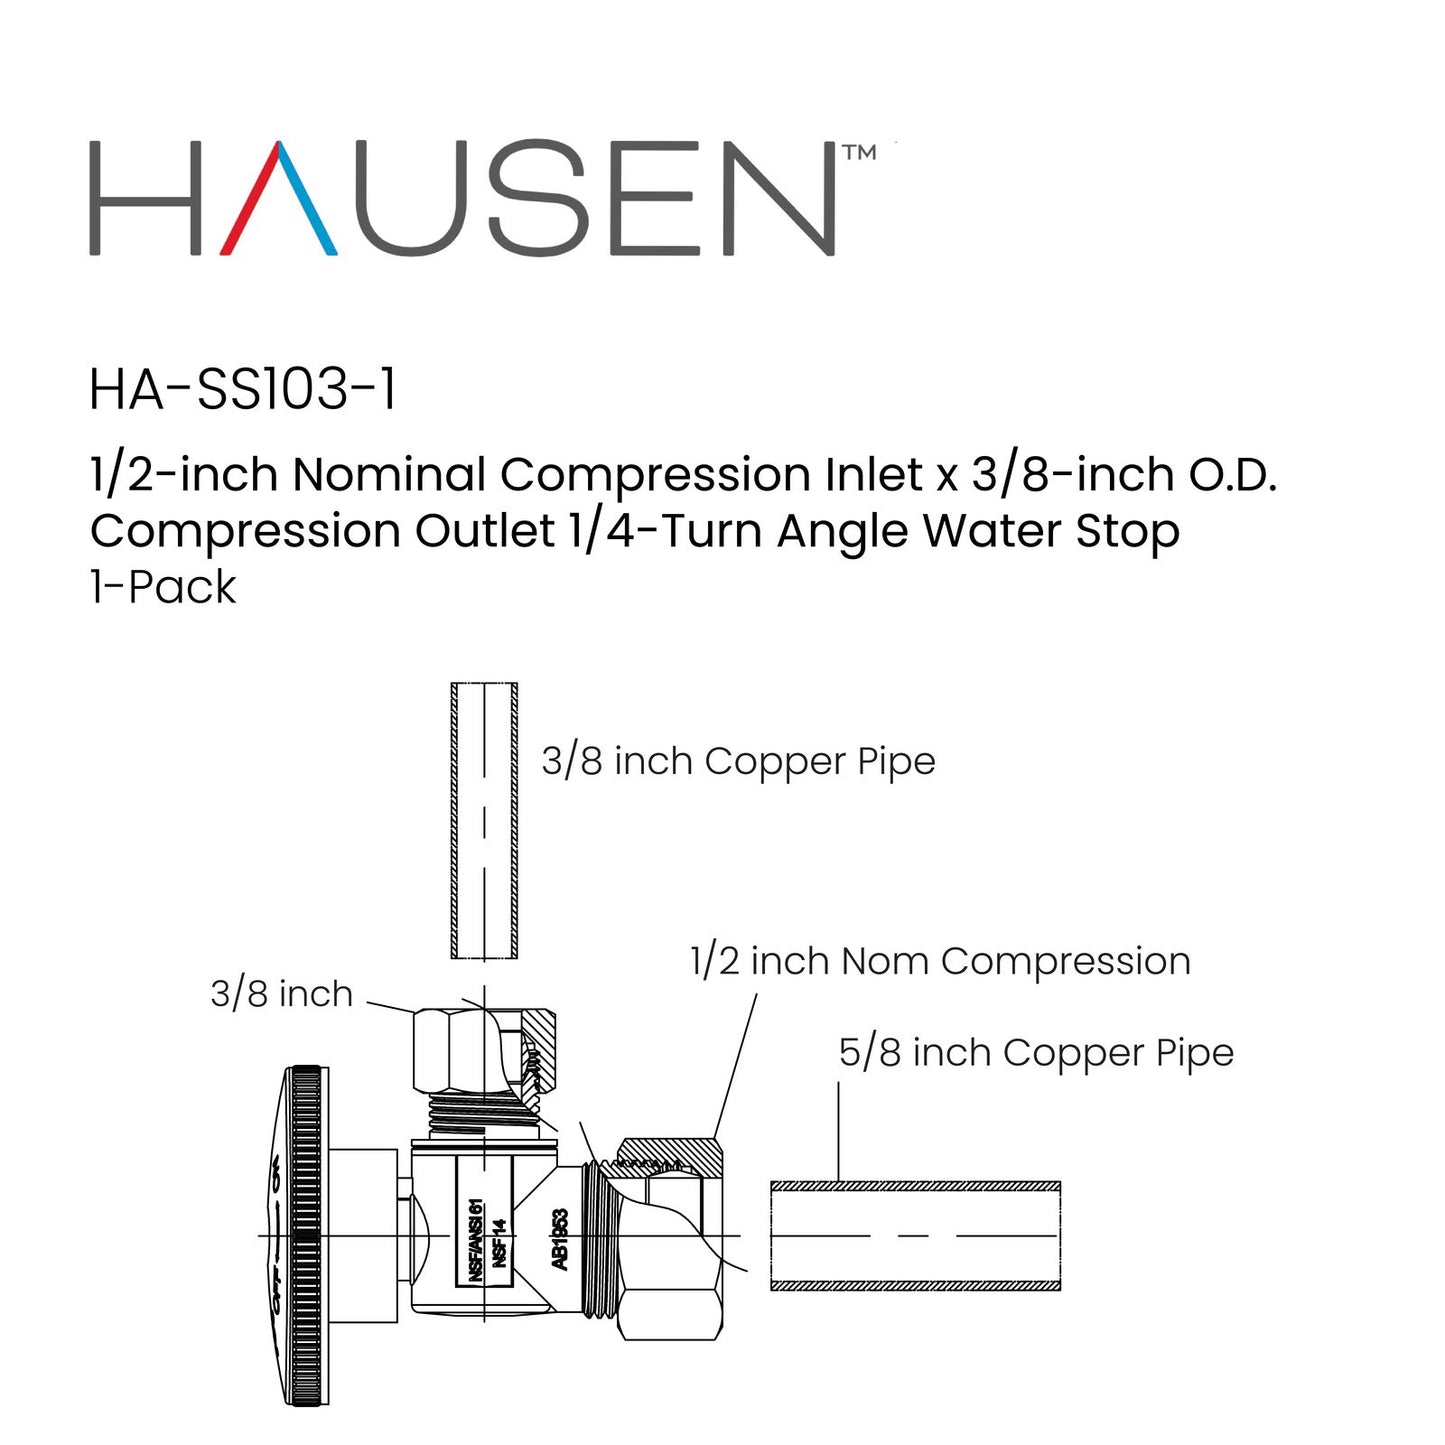 Hausen 1/2-inch Nominal Compression Inlet x 3/8-inch O.D. Compression Outlet 1/4-Turn Angle Water Stop, 1-Pack